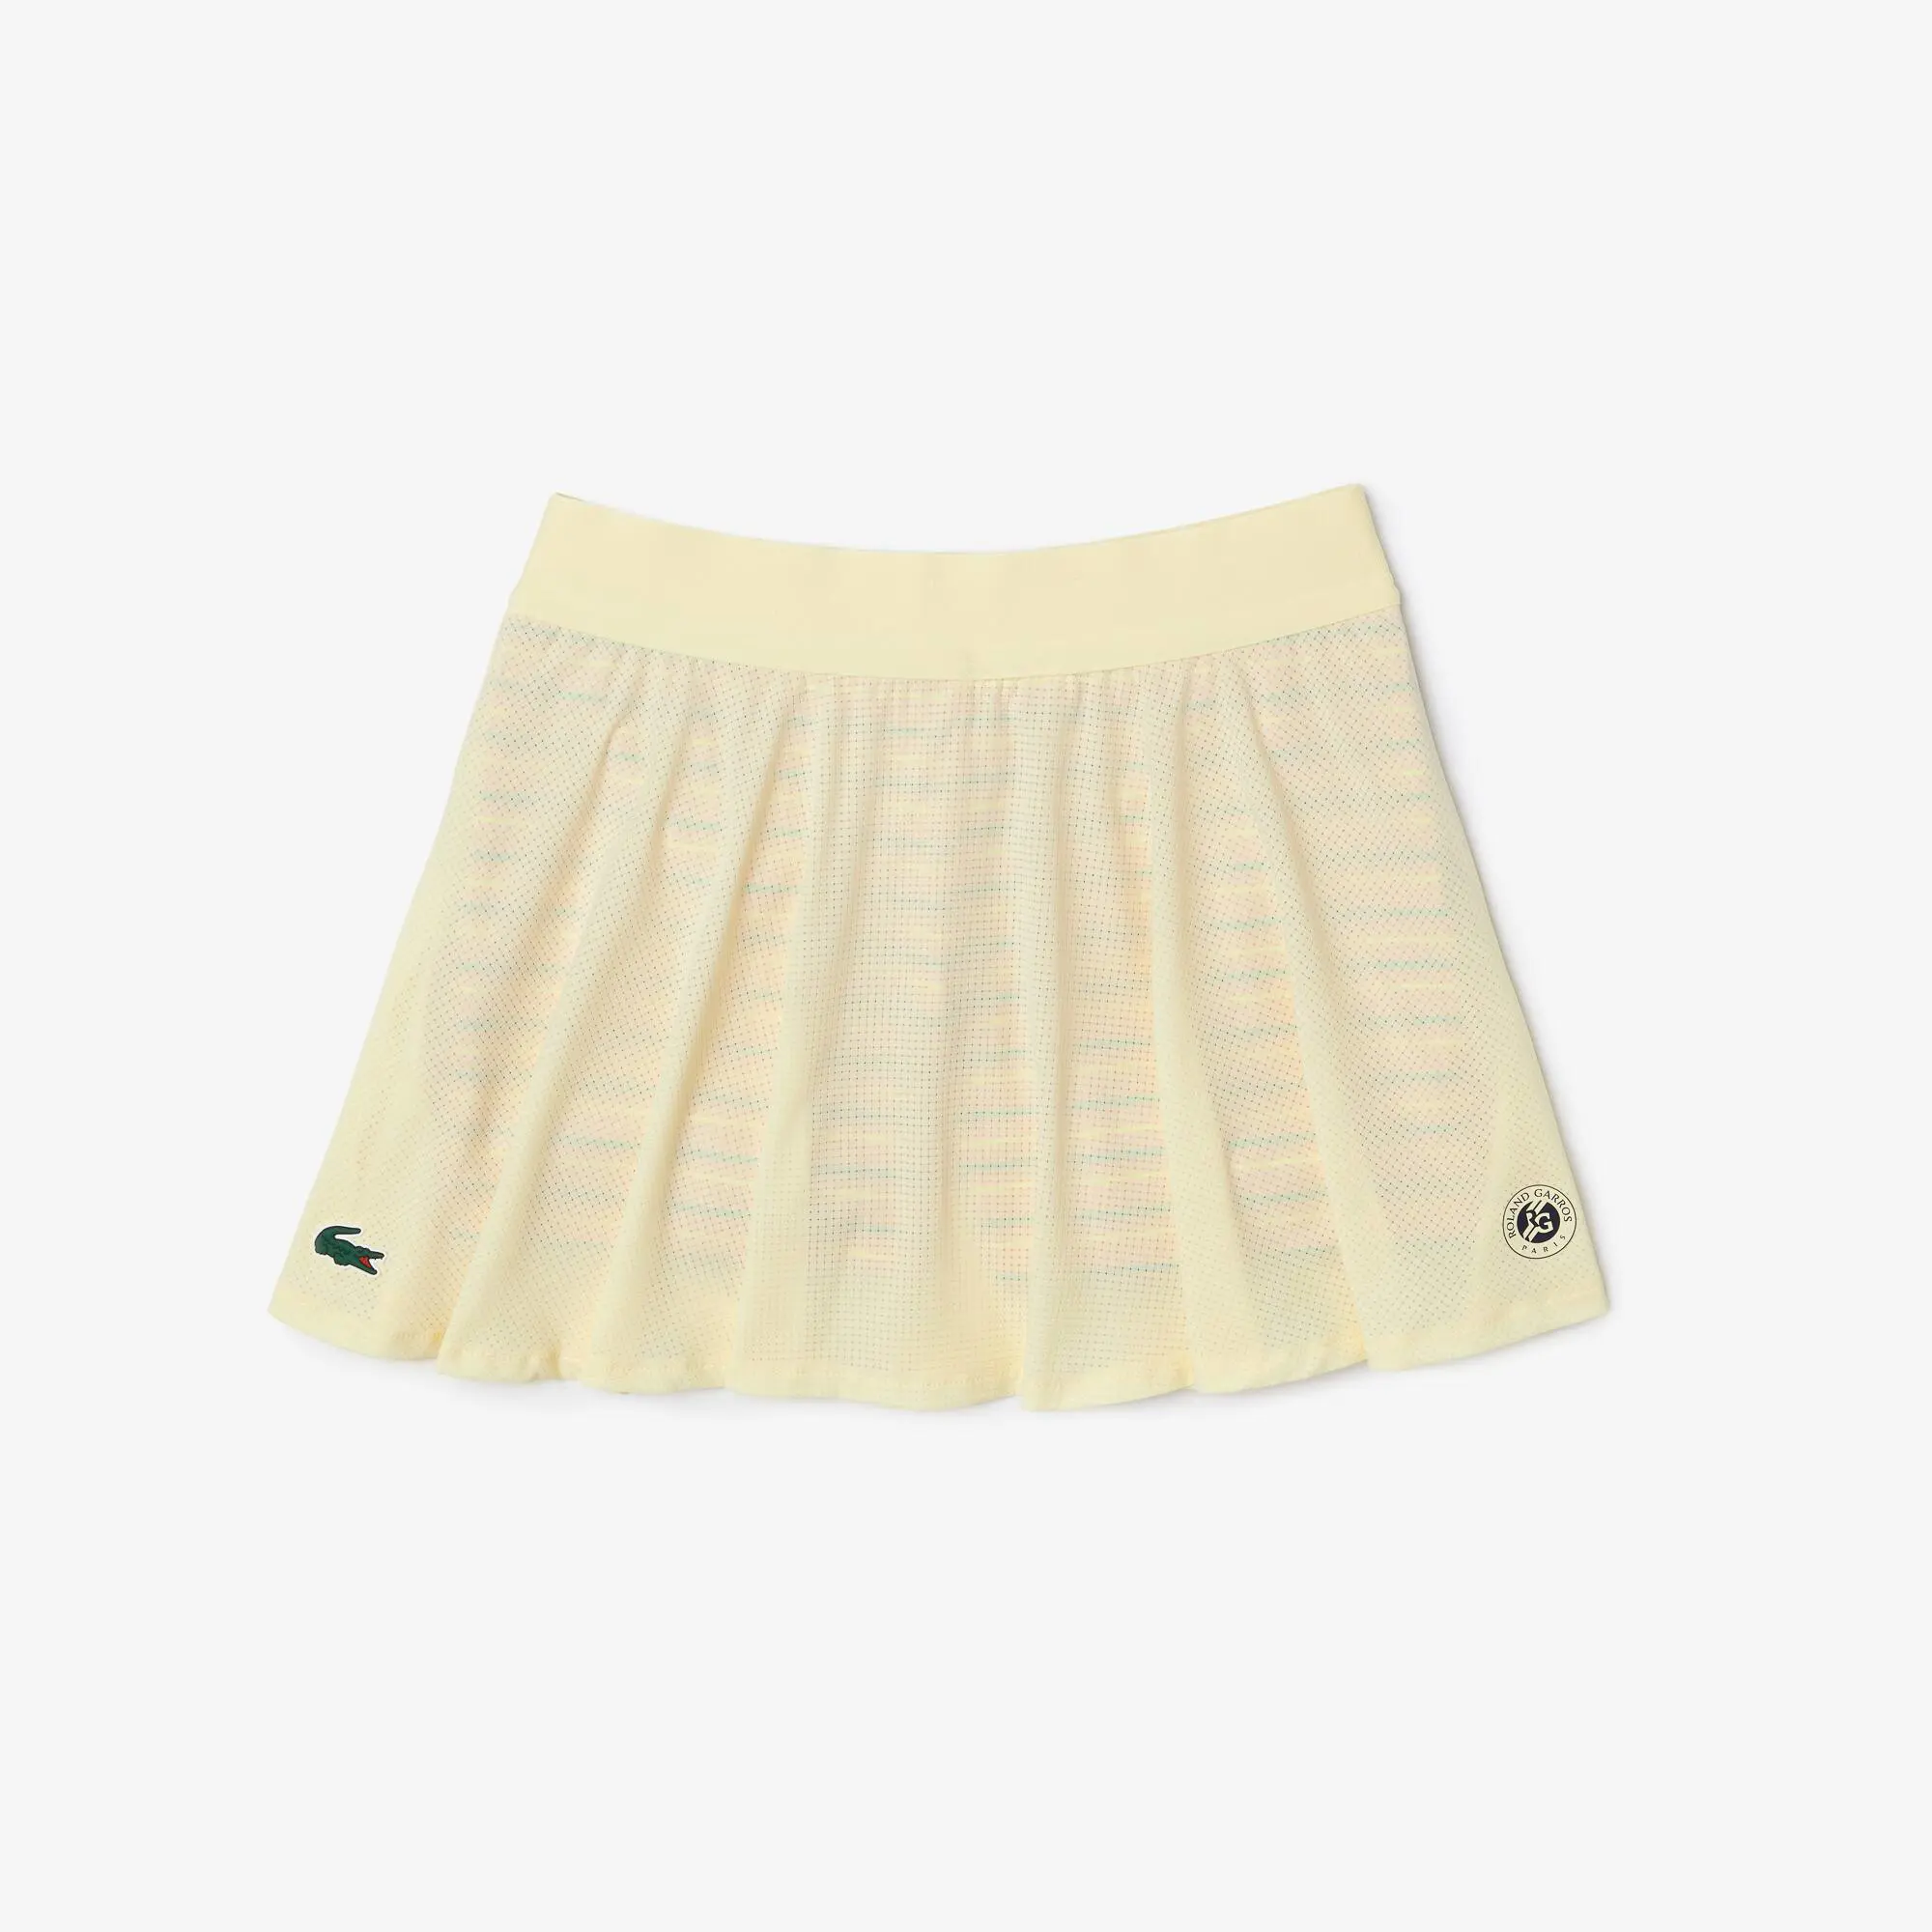 Lacoste Women’s Roland Garros Edition Sport Skirt with Built-in Shorts. 2